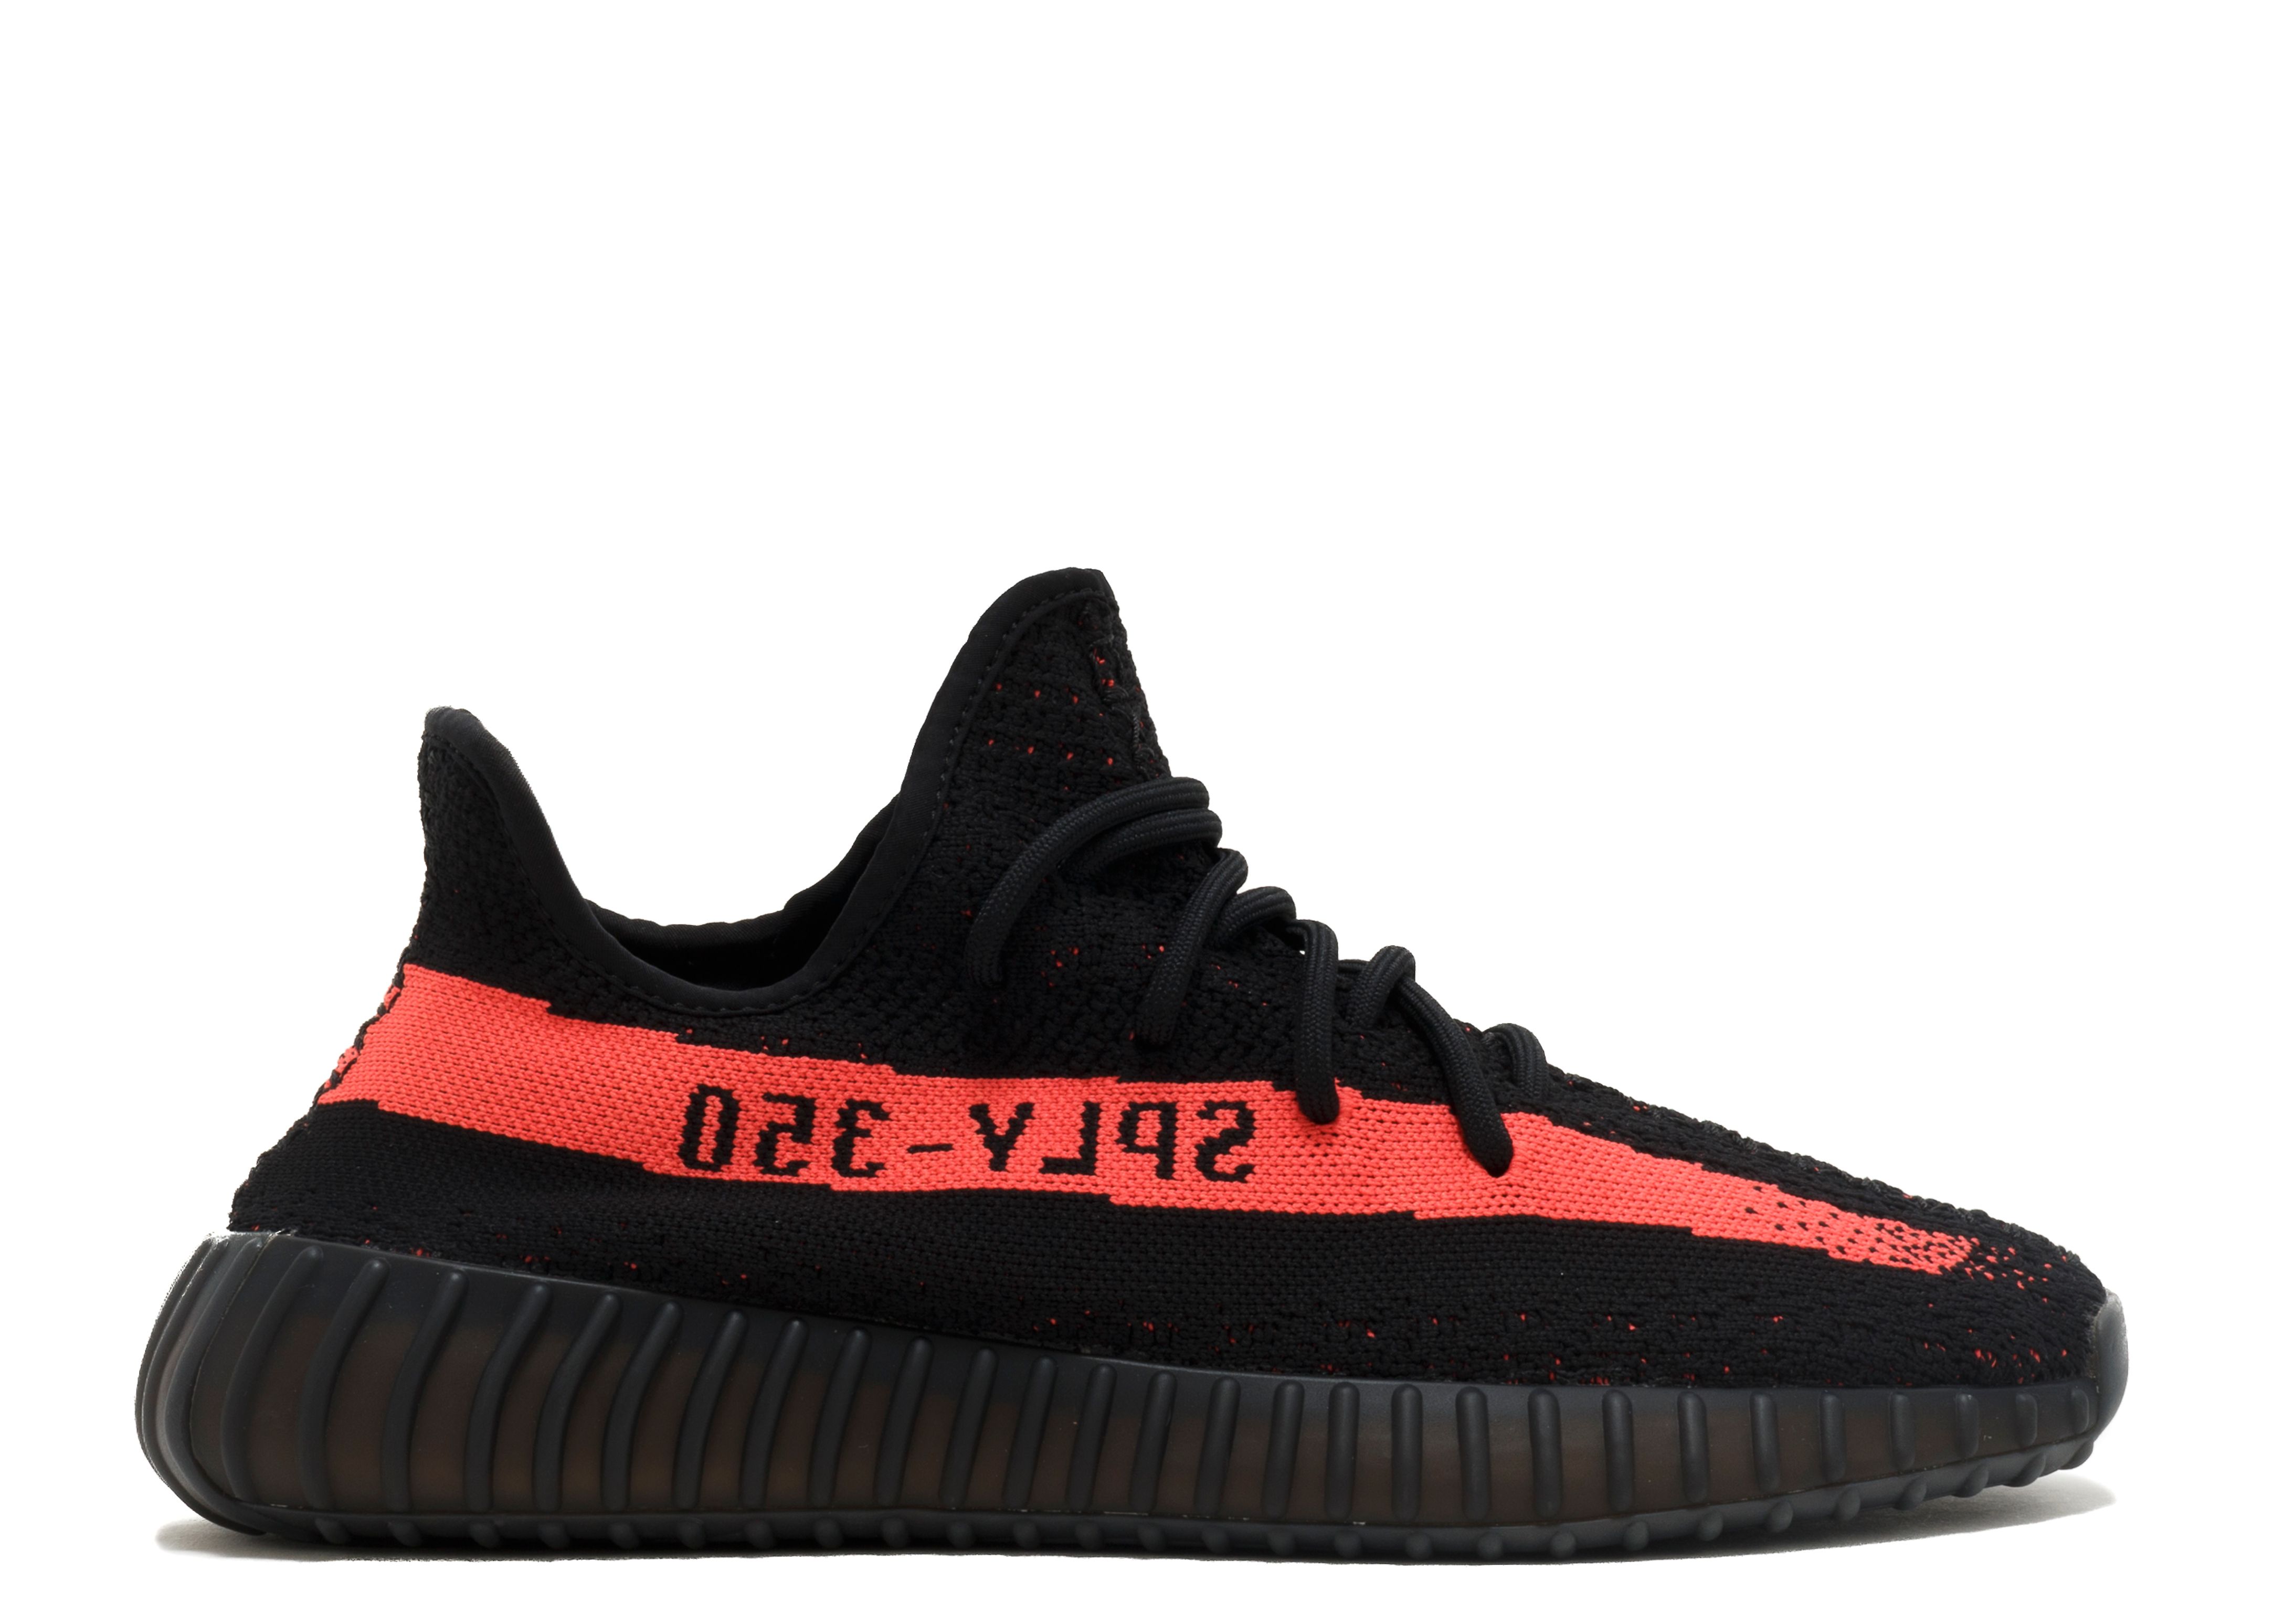 BY9611 Adidas Yeezy Boost 350 V2 Core Black / Green Kanye IN